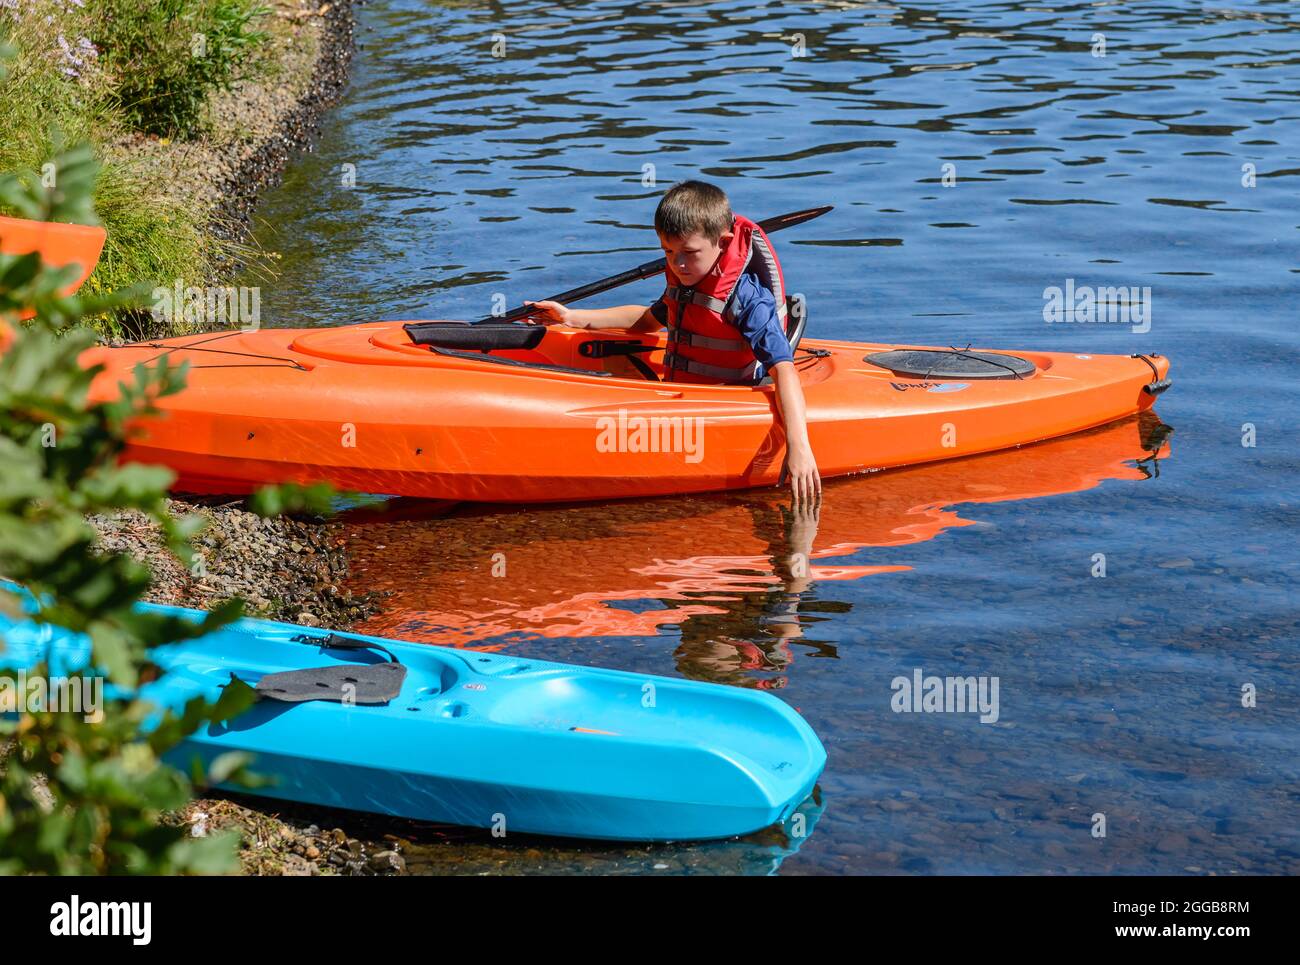 A young boy is trying to launch a canoe in a lake. Oregon, USA. Stock Photo